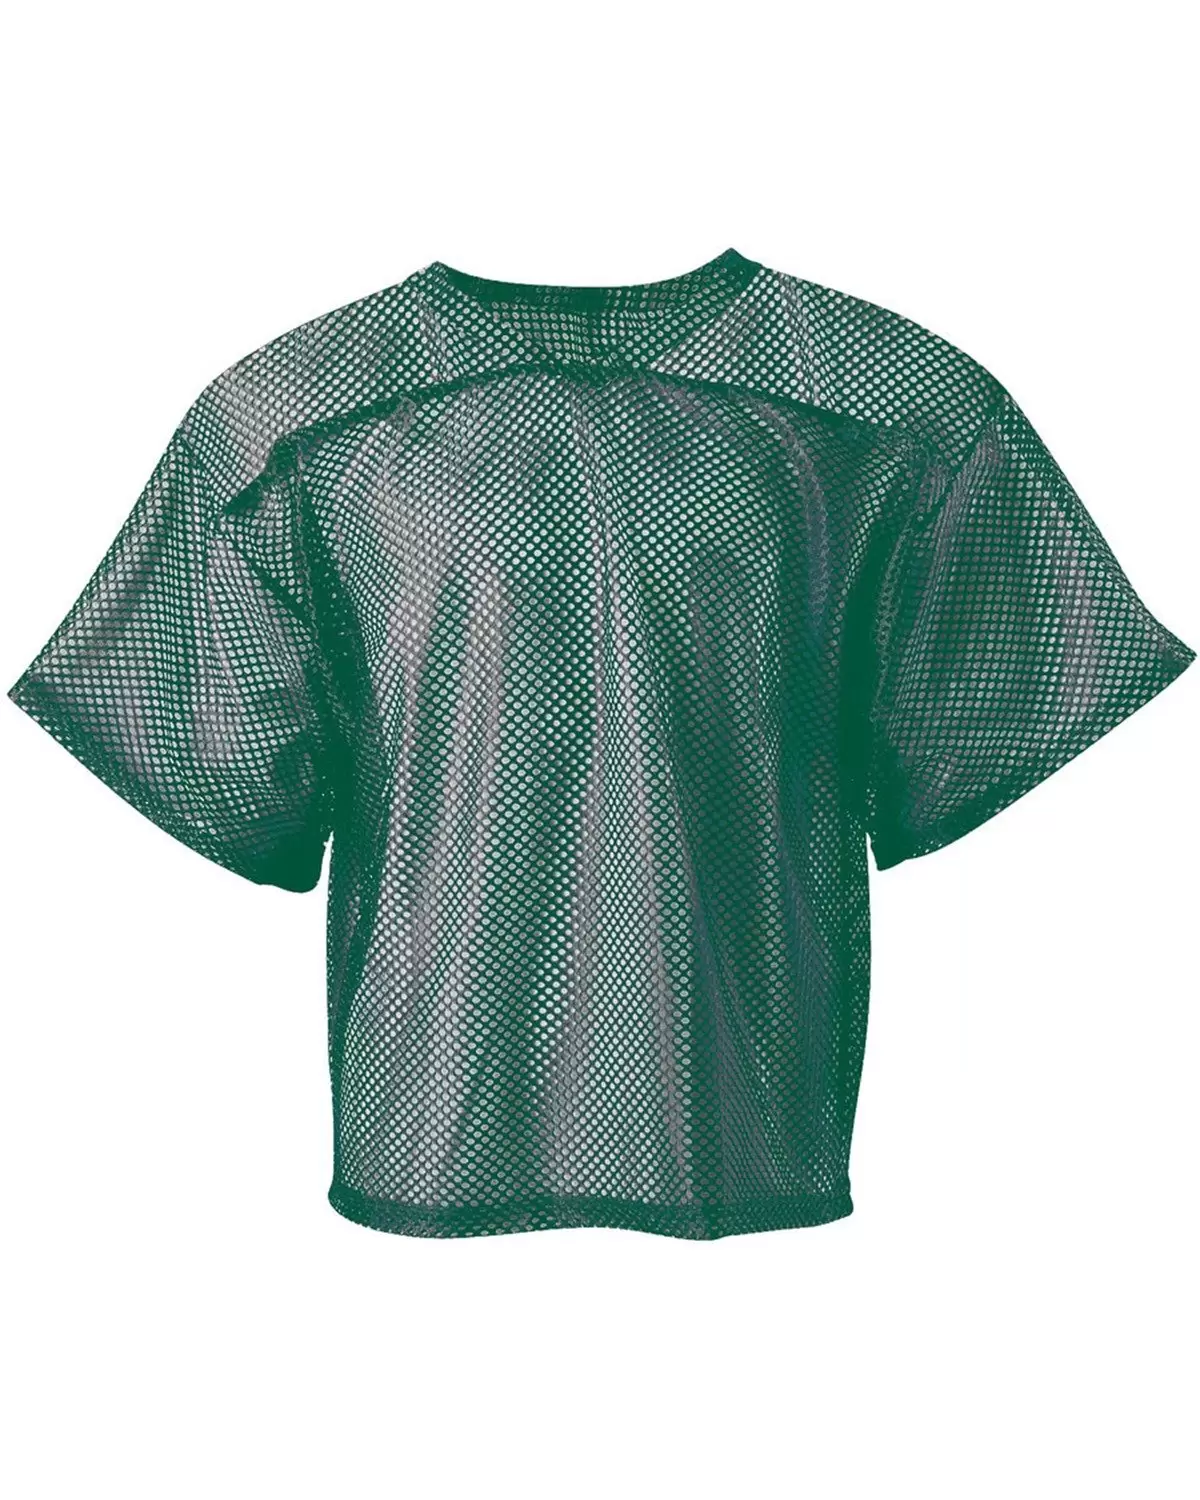 BSN Sports Practice Jersey - Other Women's Green/Black New without Tags M  348 - Locker Room Direct